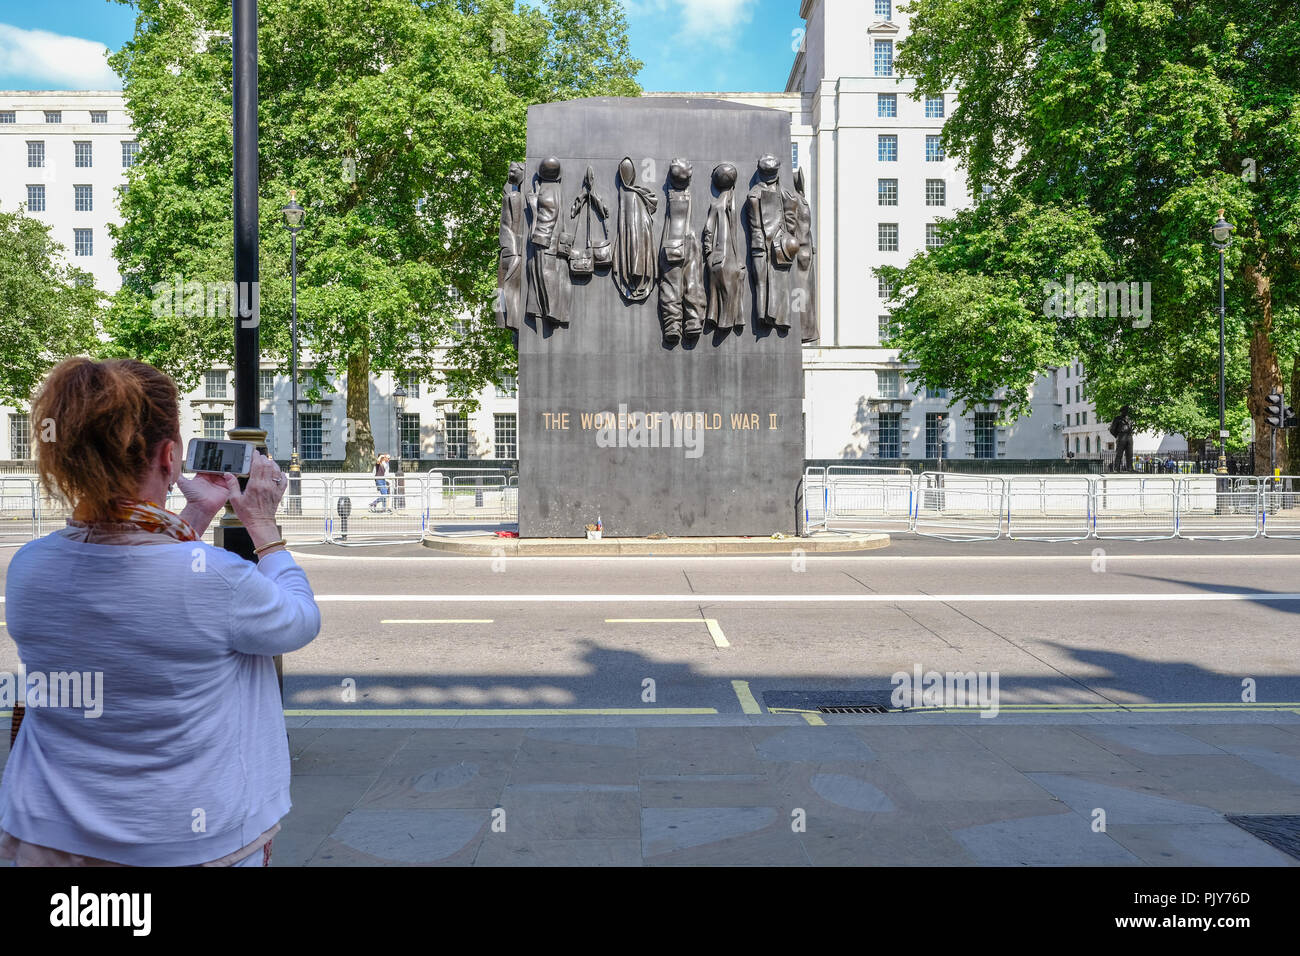 Whitehall, London, UK - June 8, 2018: Lady taking a photo with her mobile of the Monument for Women of World Ward Two memorial in Whitehall. Stock Photo